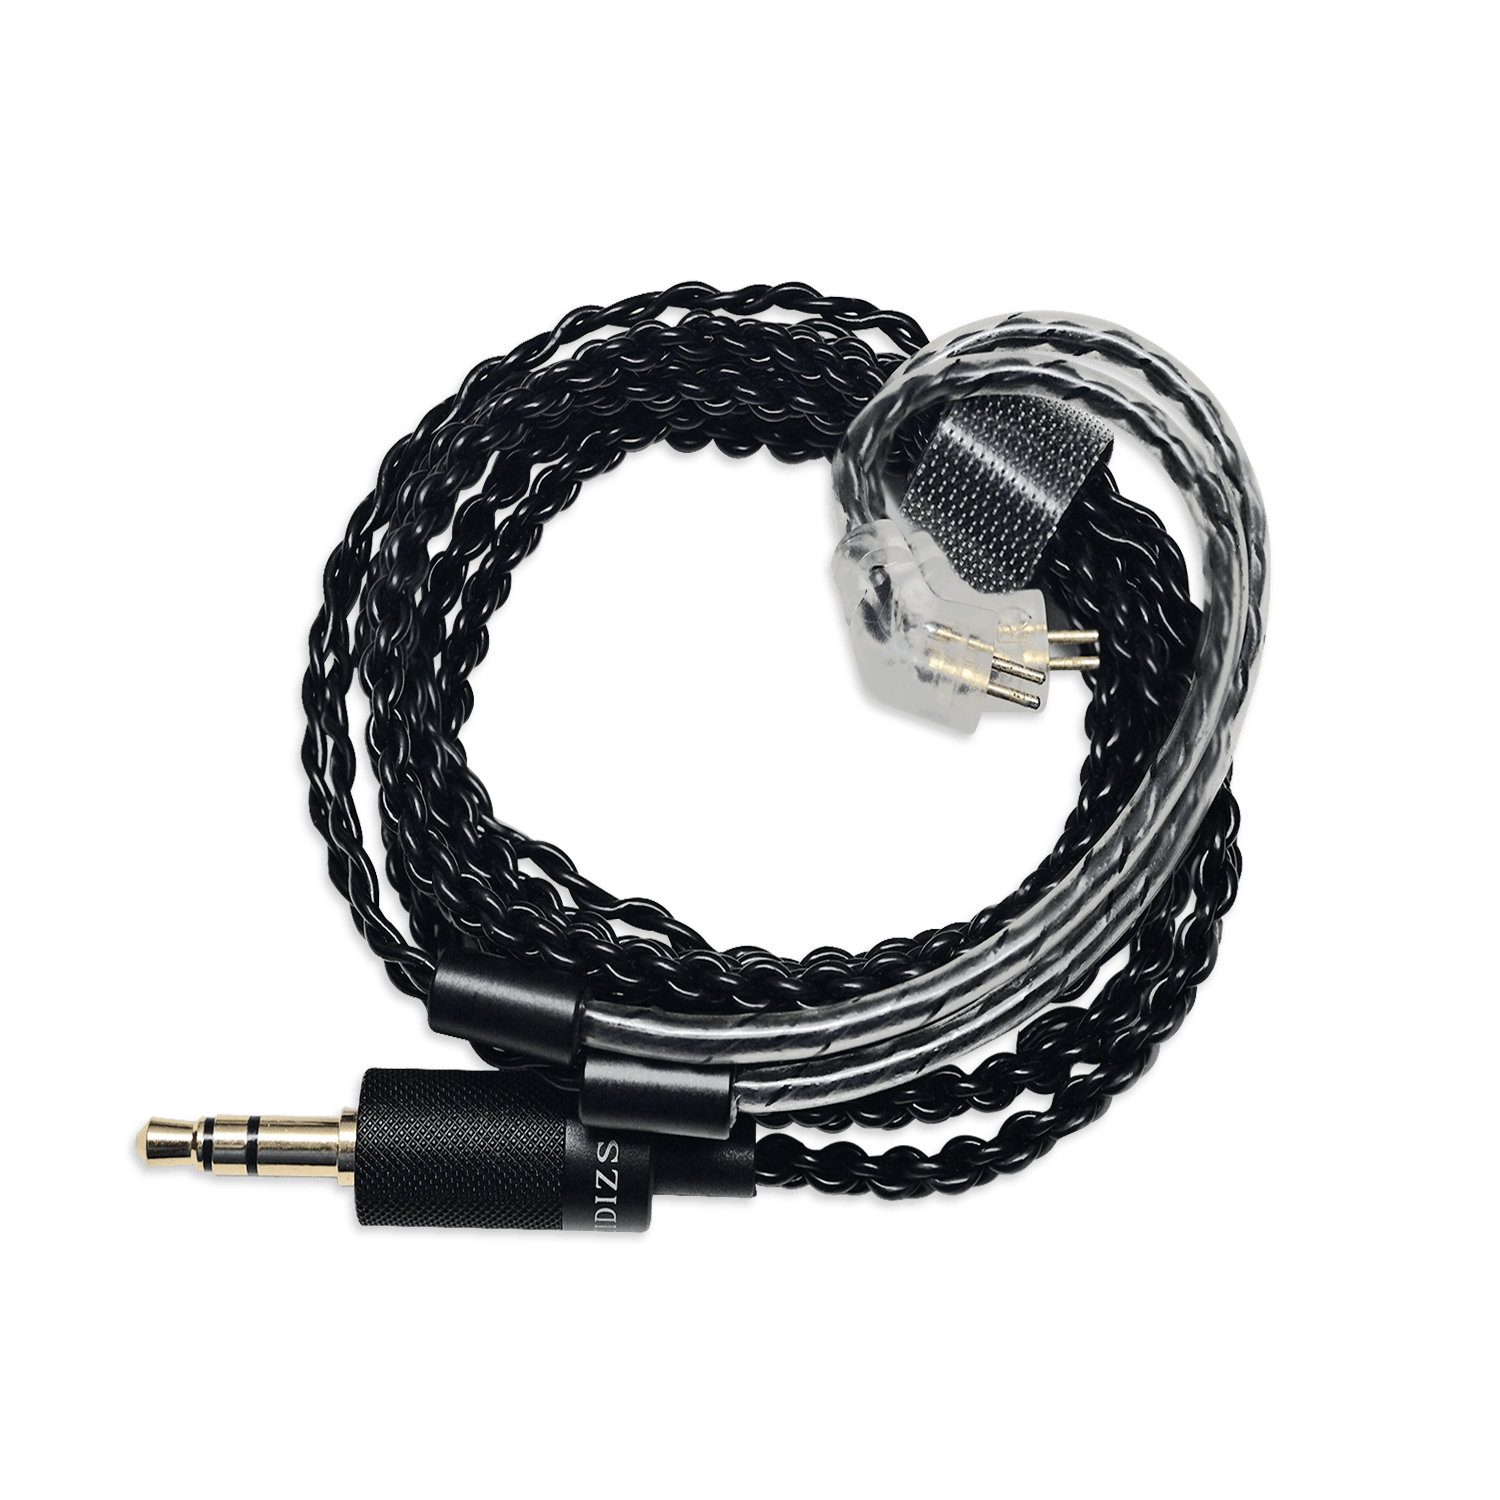 Hidizs 3.5mm Upgrade Cable (0.78mm 2pin)